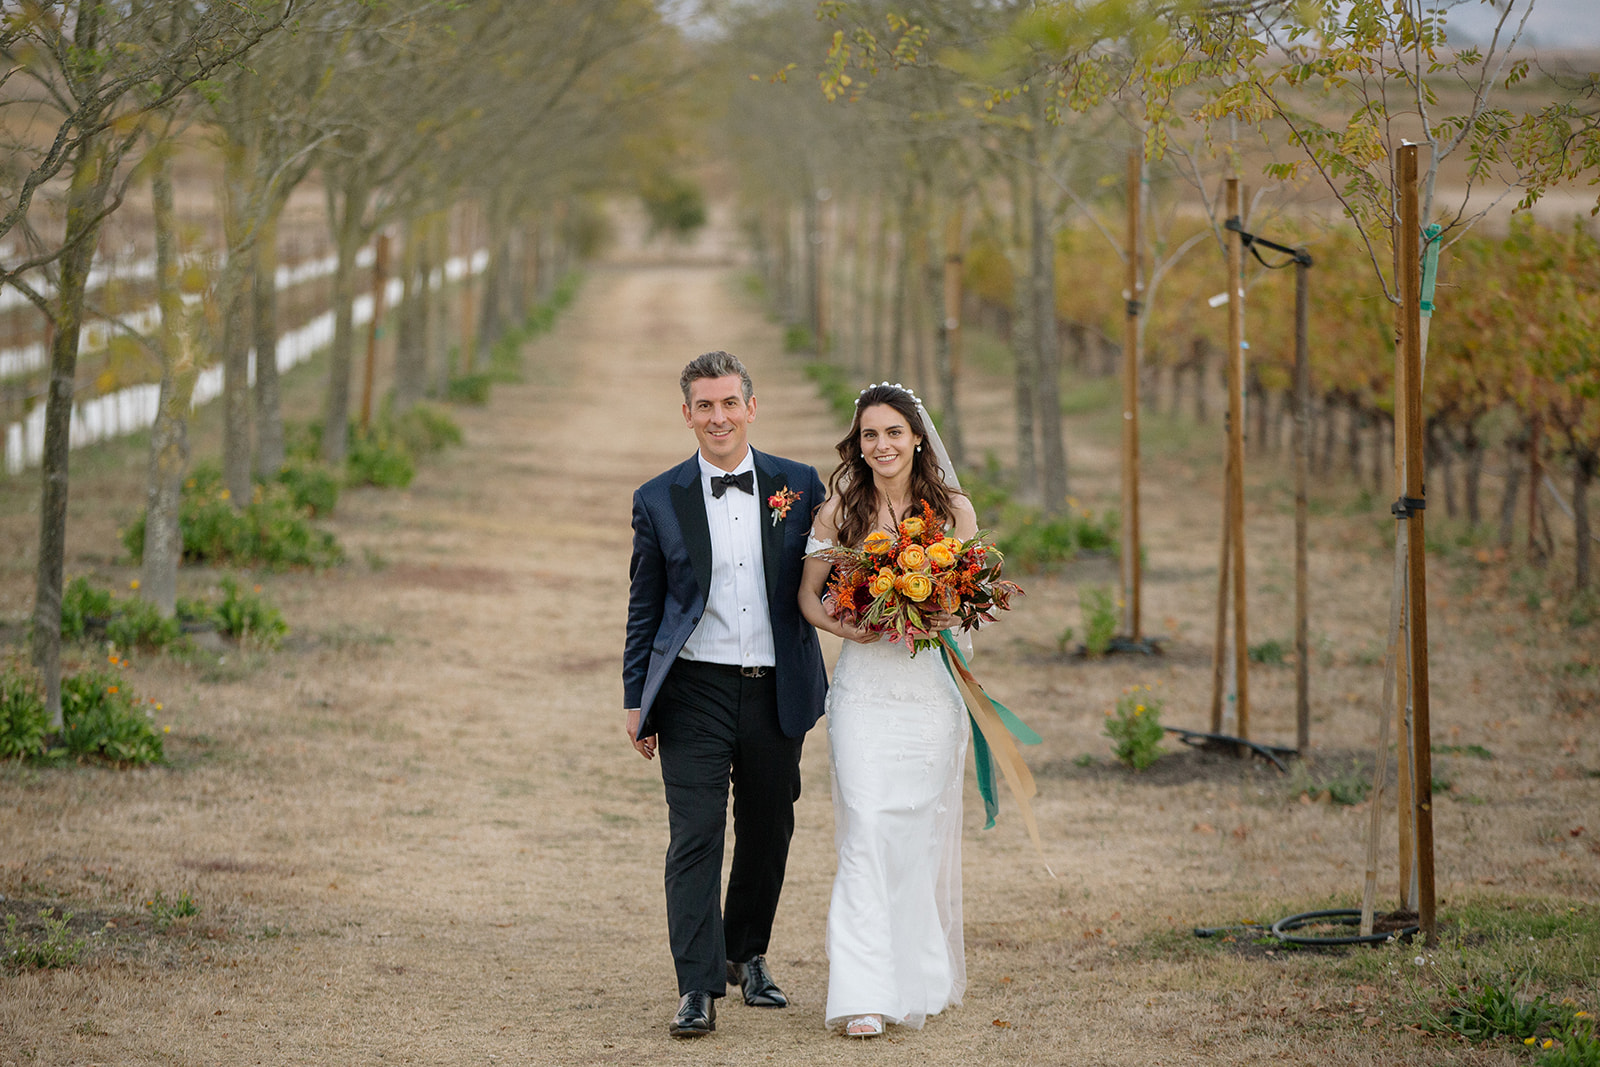 Bride and groom in the vineyard at Jacuzzi Winery in Sonoma